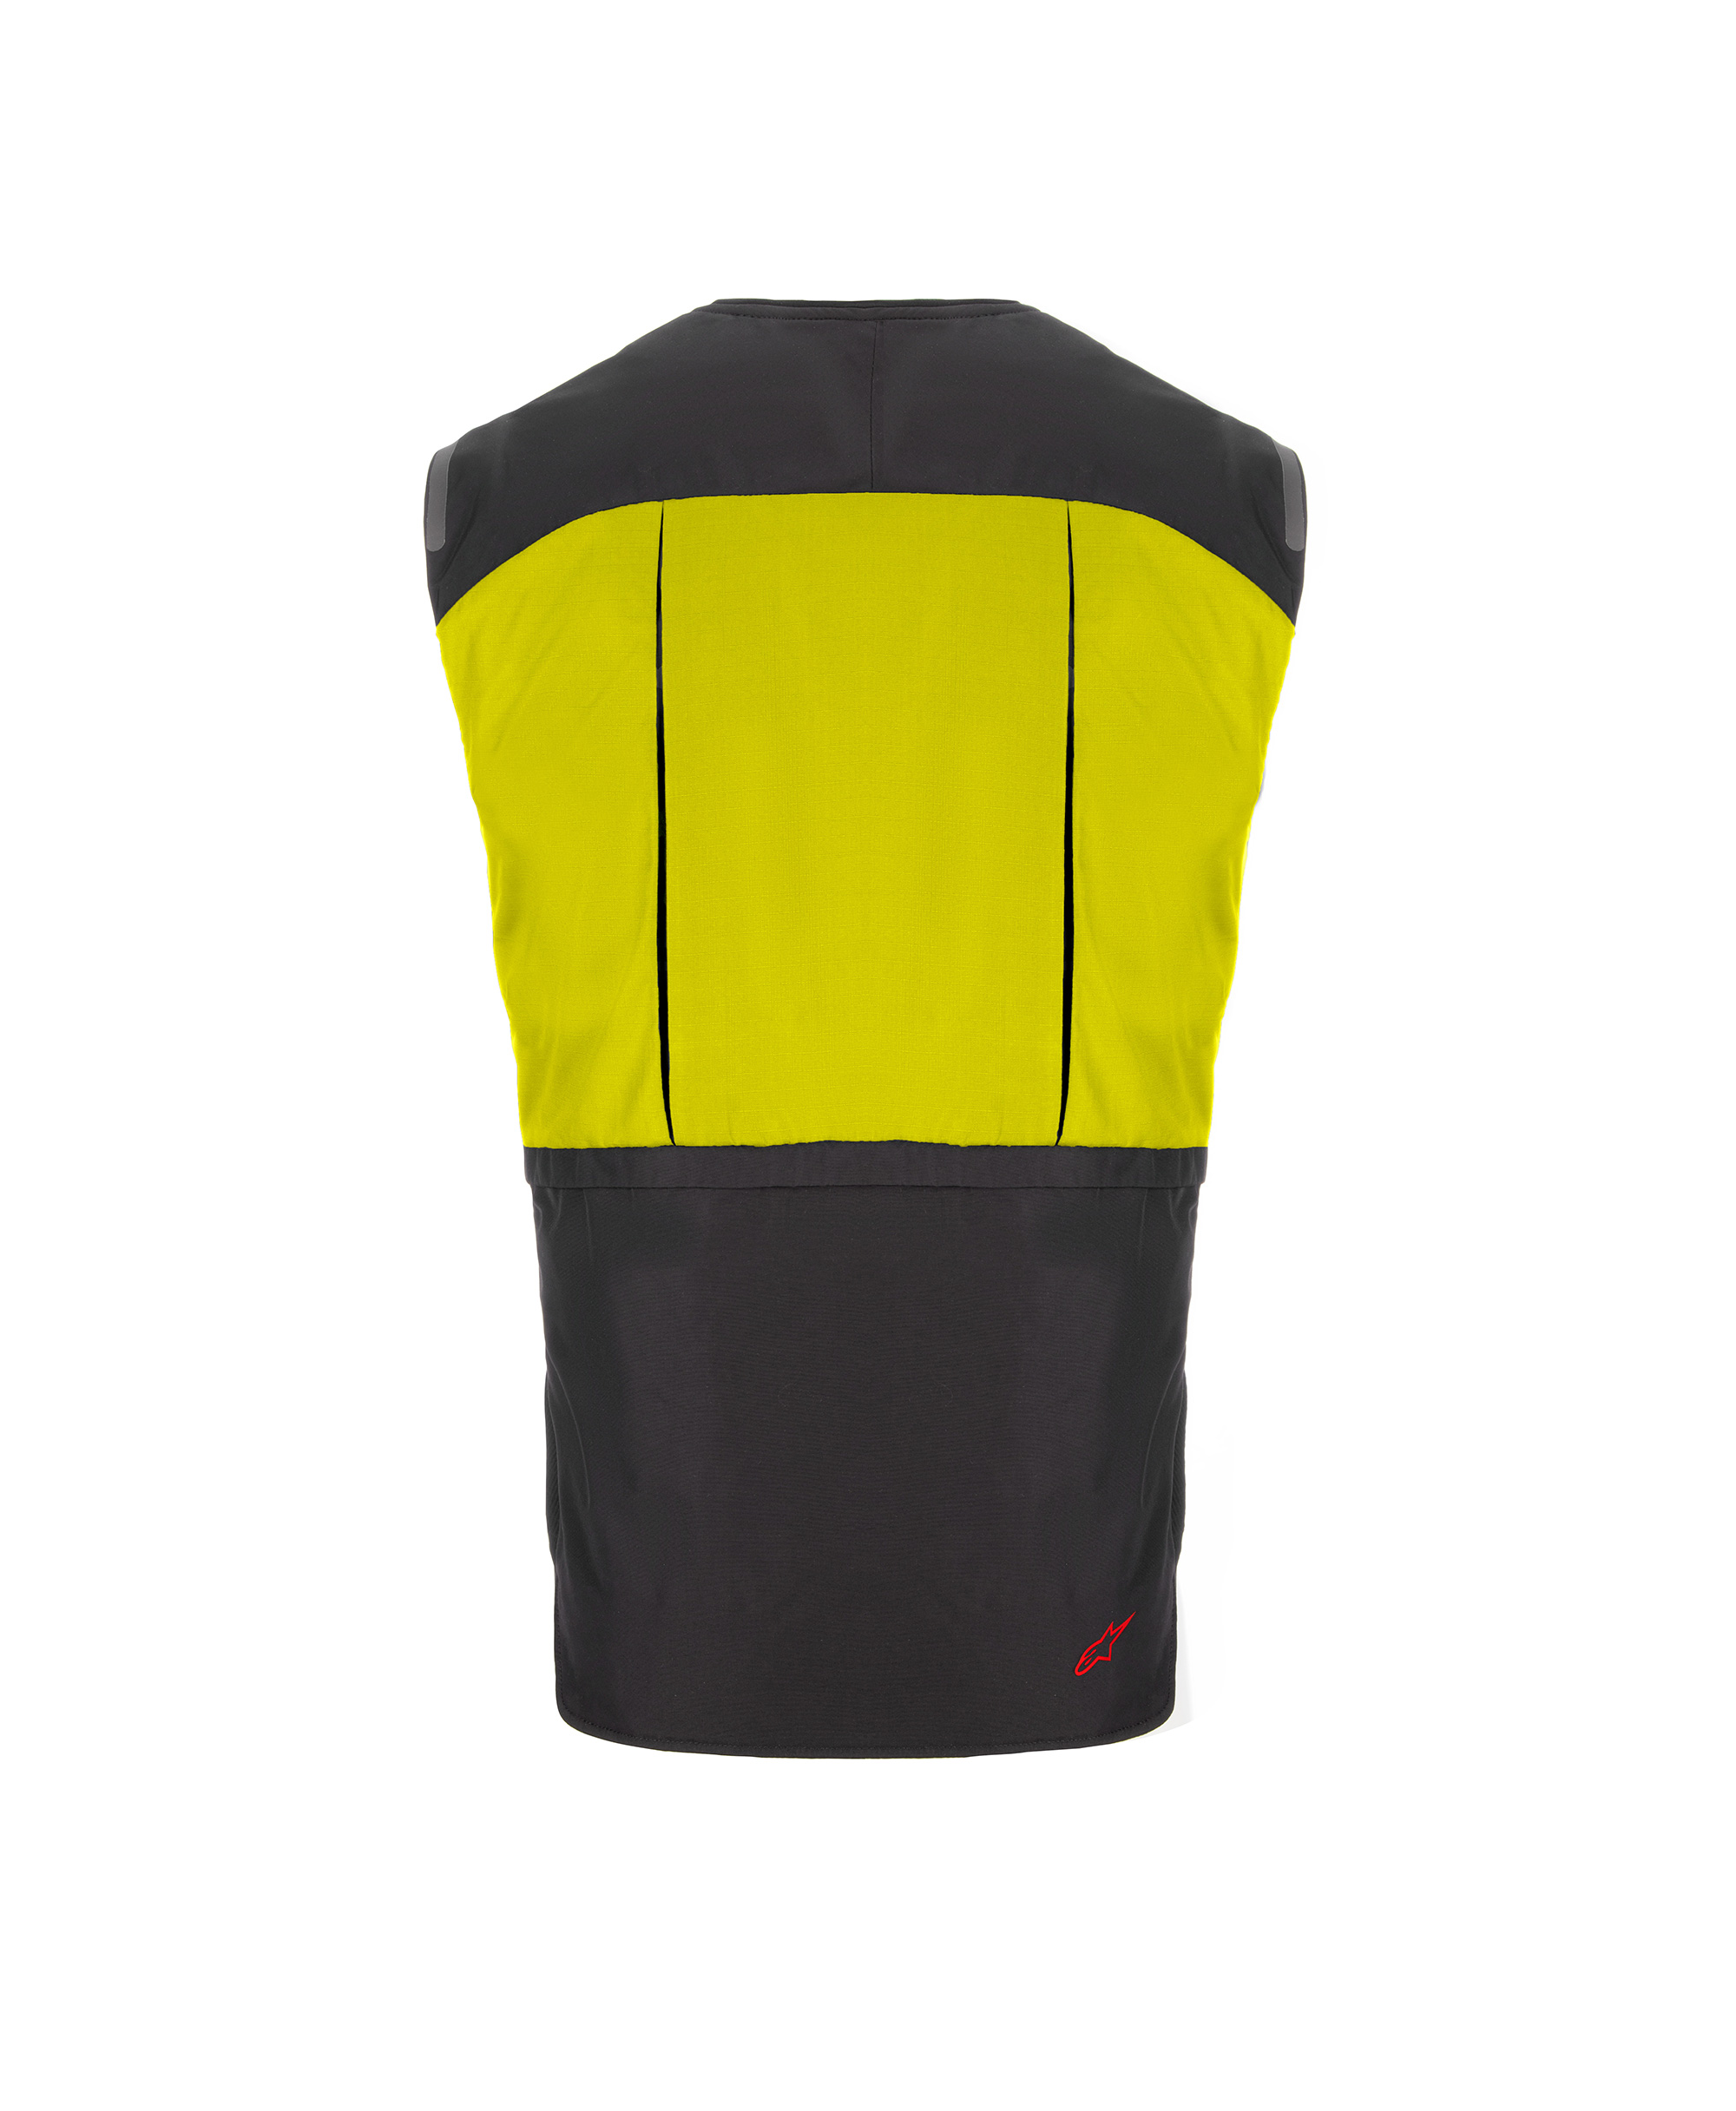 TECH-AIR 3 SYSTEM BLACK YELLOW FLUO